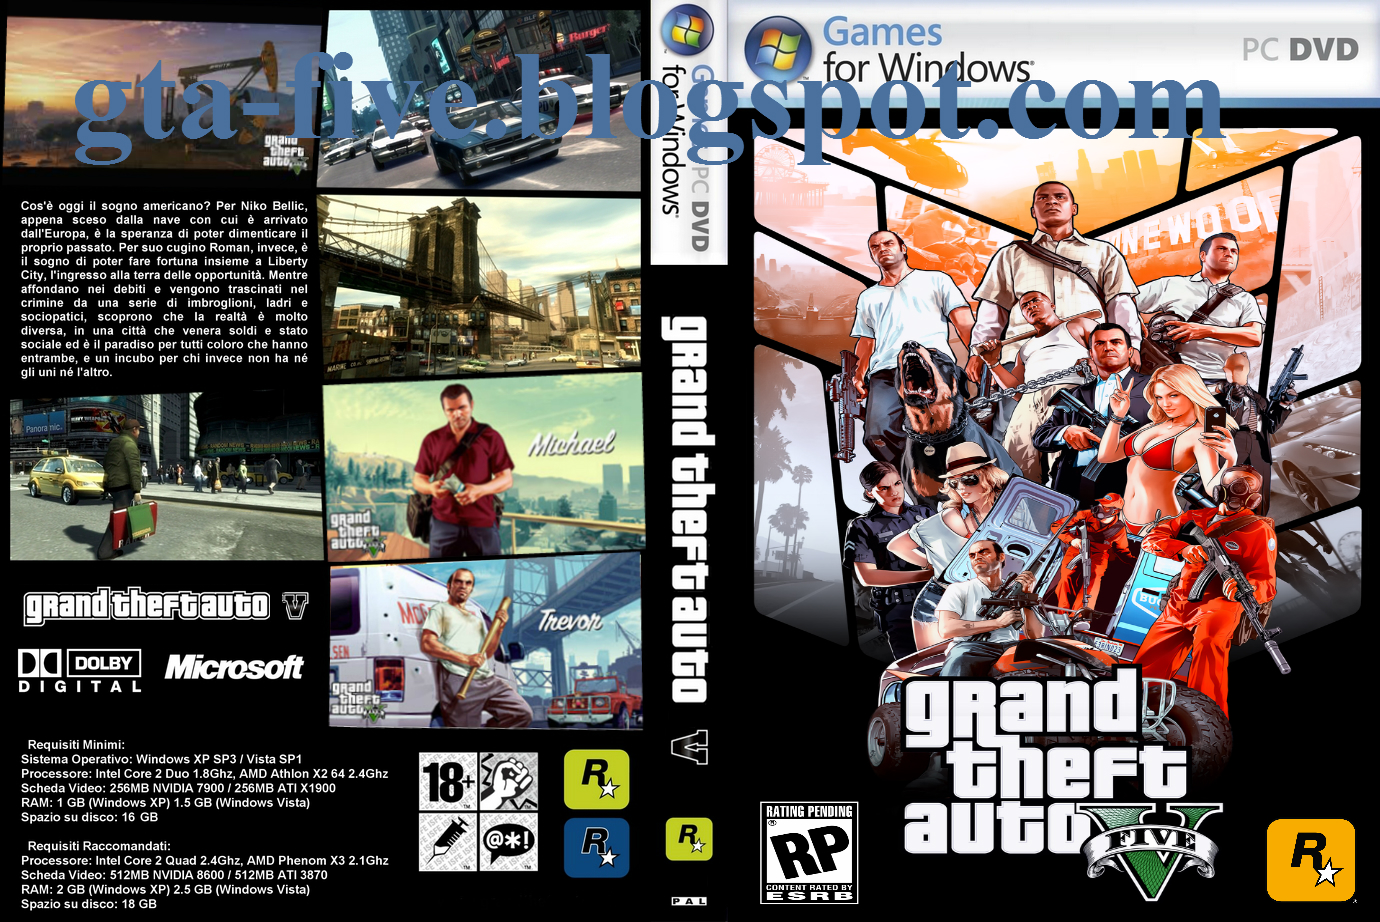 Download Grand Theft Auto 5, GTA 5 beta for free. Get the full leaked ...